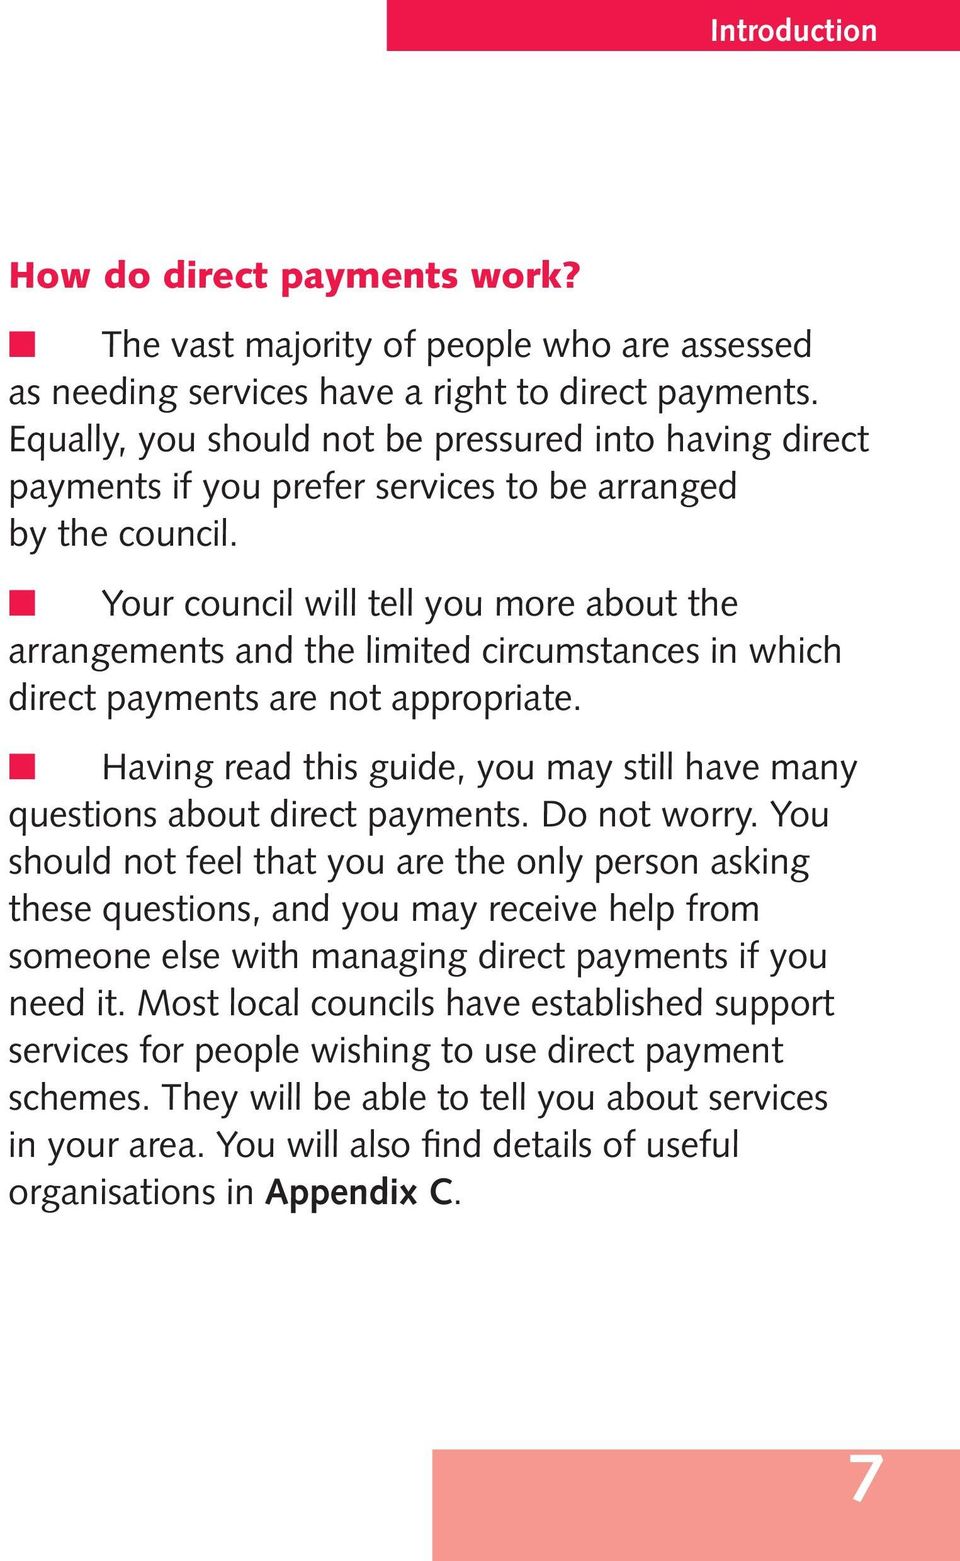 Your council will tell you more about the arrangements and the limited circumstances in which direct payments are not appropriate.